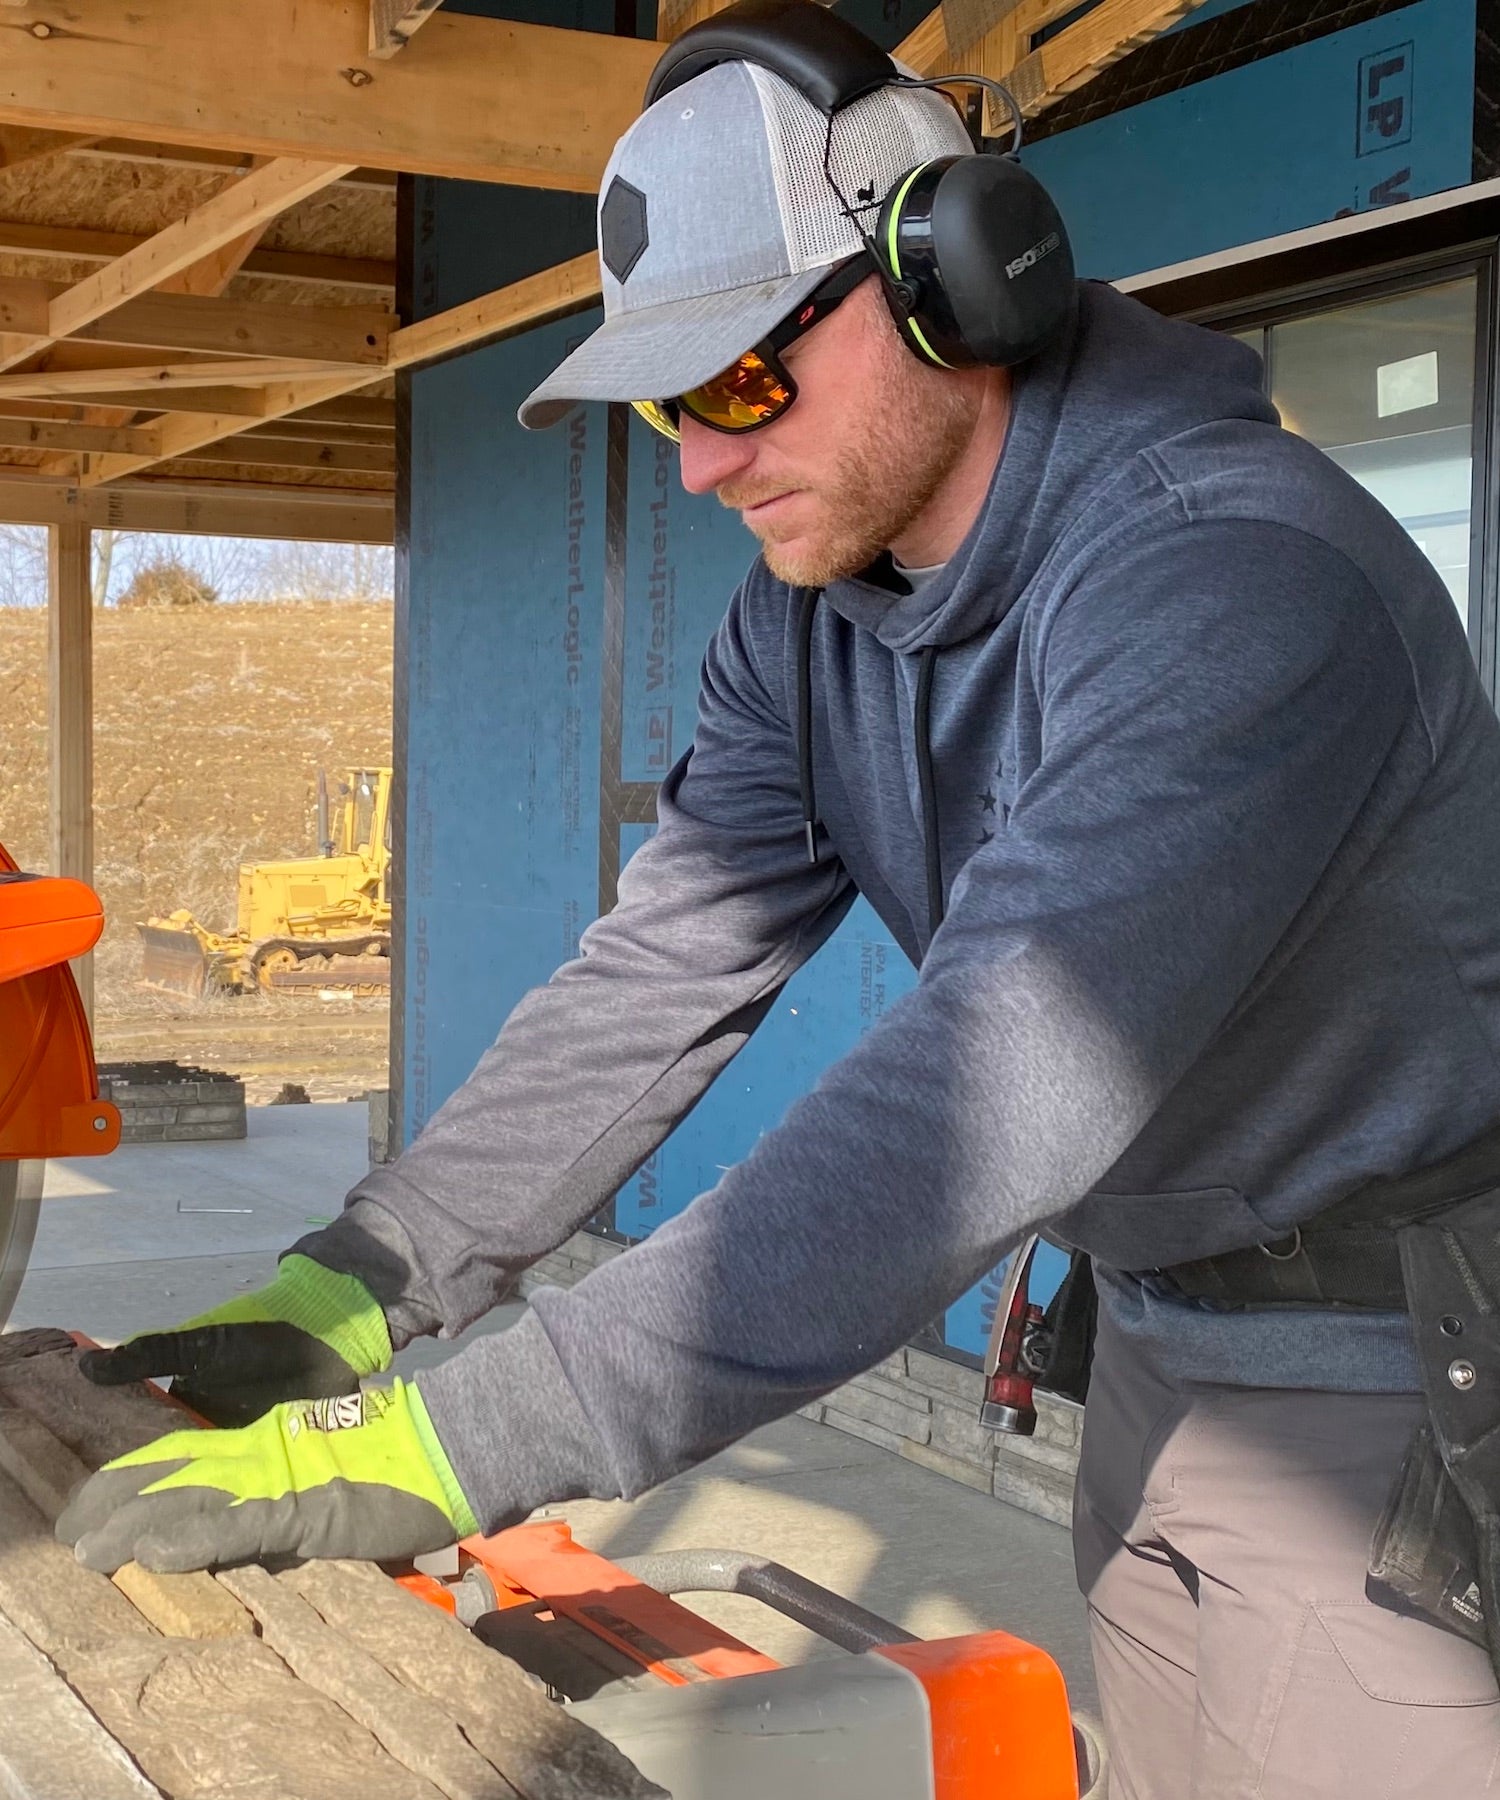 ISOtunes Hearing Protection Earmuffs for Construction Workers